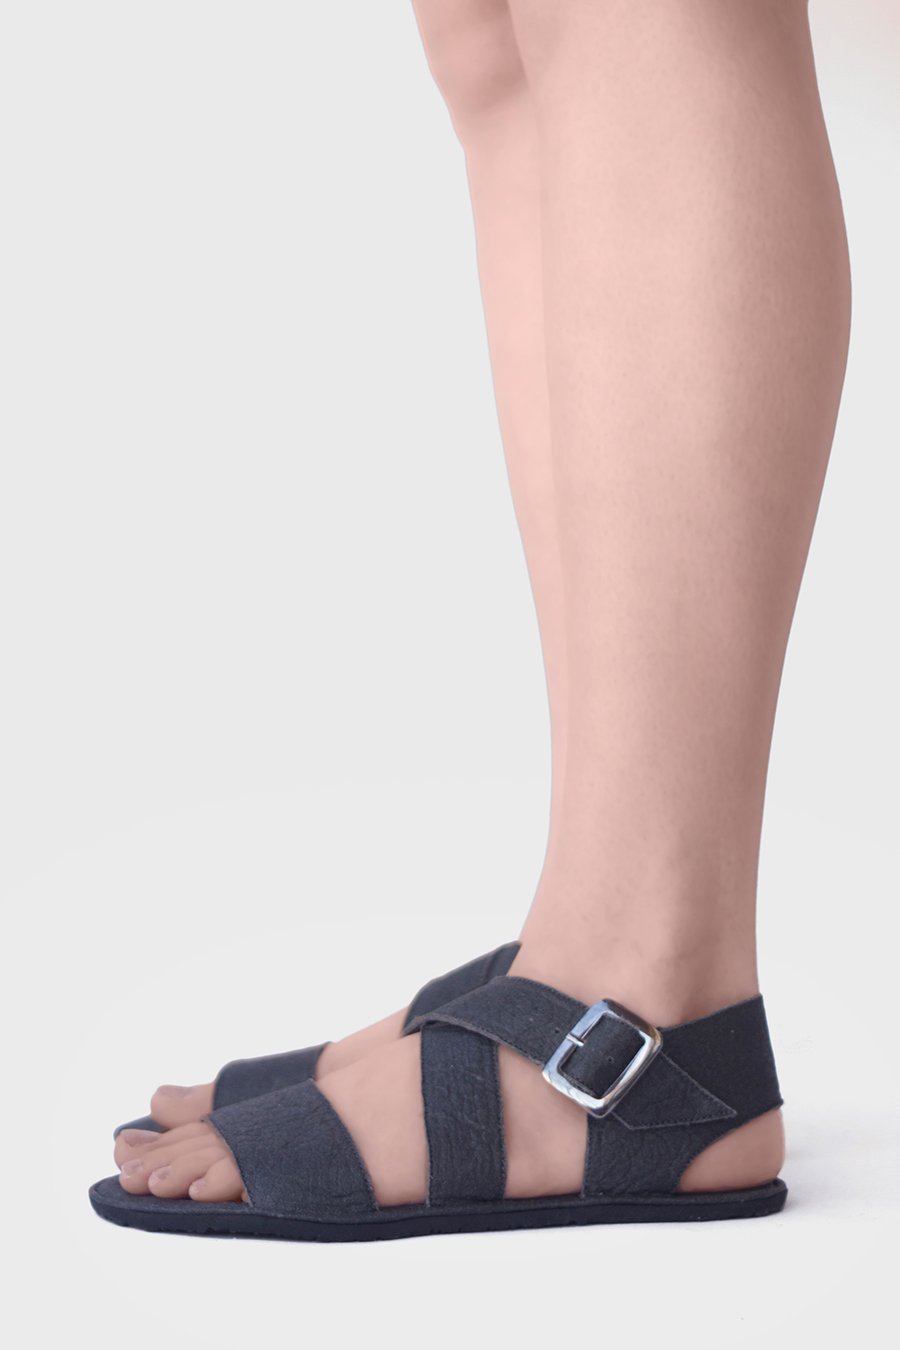 Image of Sandal X in Charcoal Piñatex®